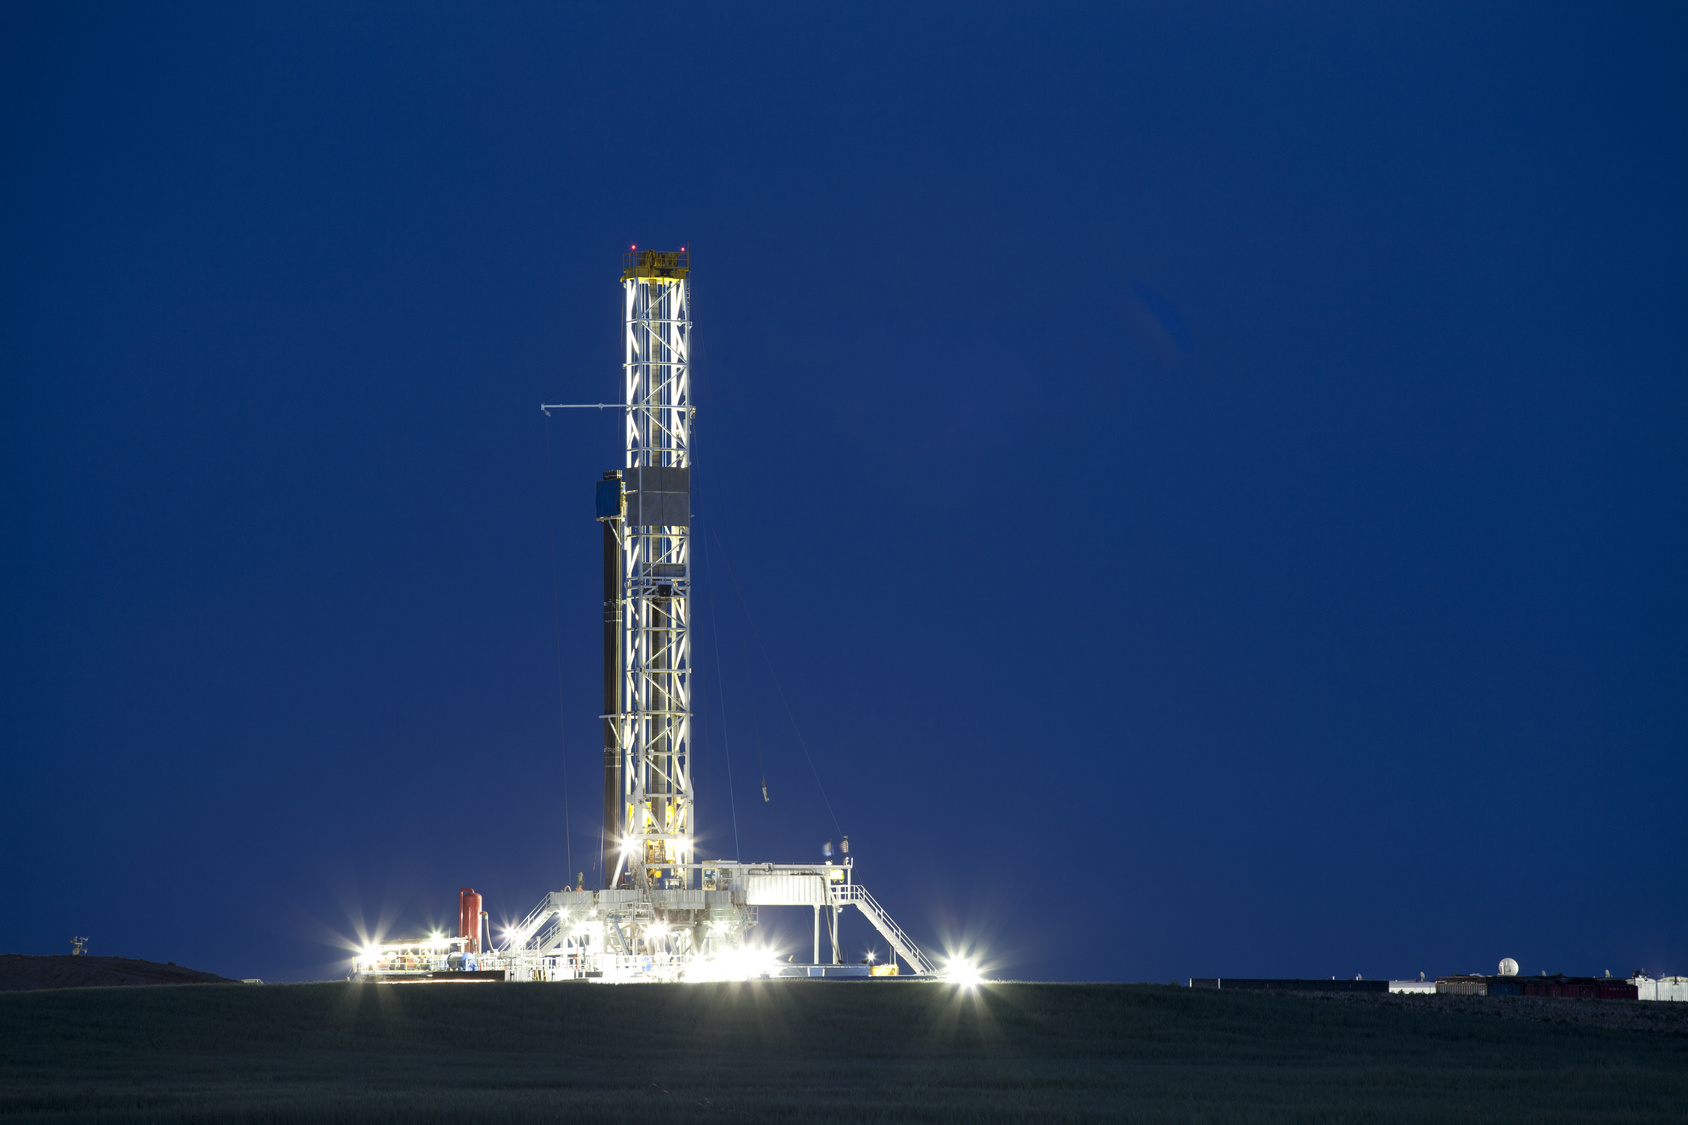 A well drilling rig works in the eastern plains of Colorado to reach the Niobrara Shale formation.  Once the well is drilled and perforated, water, sand and chemicals will be injected under high pressure to fracture the shale, releasing oil and gas.